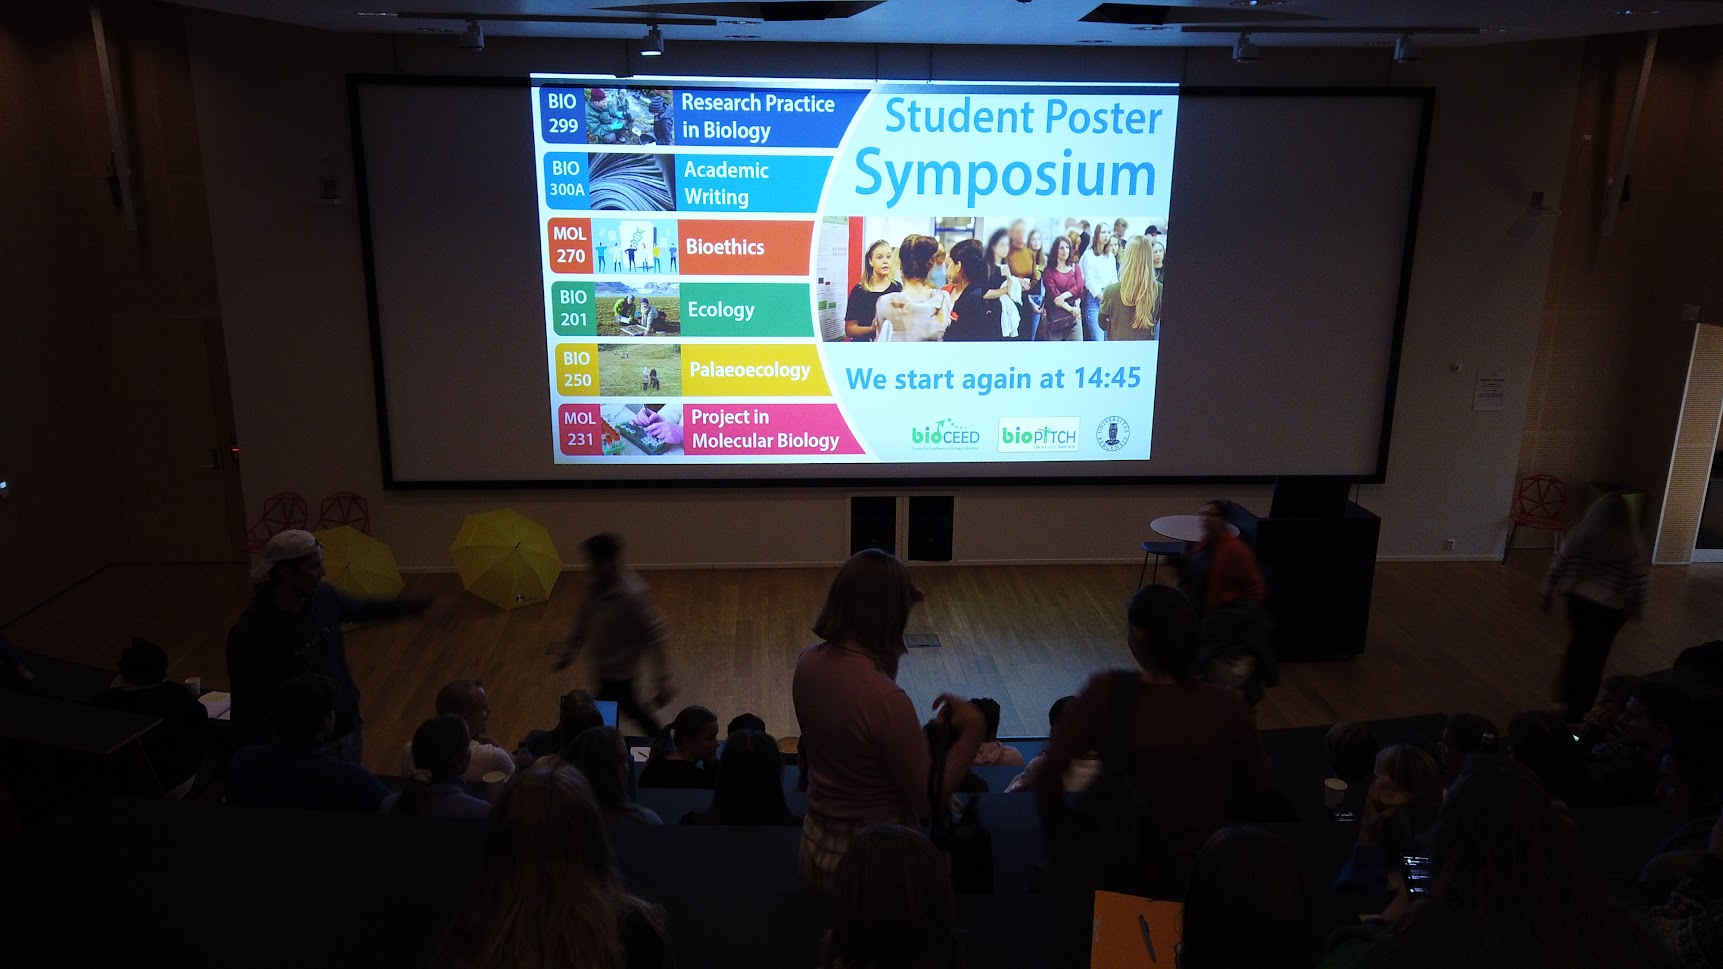 Students gathered at the auditorium for the poster symposium